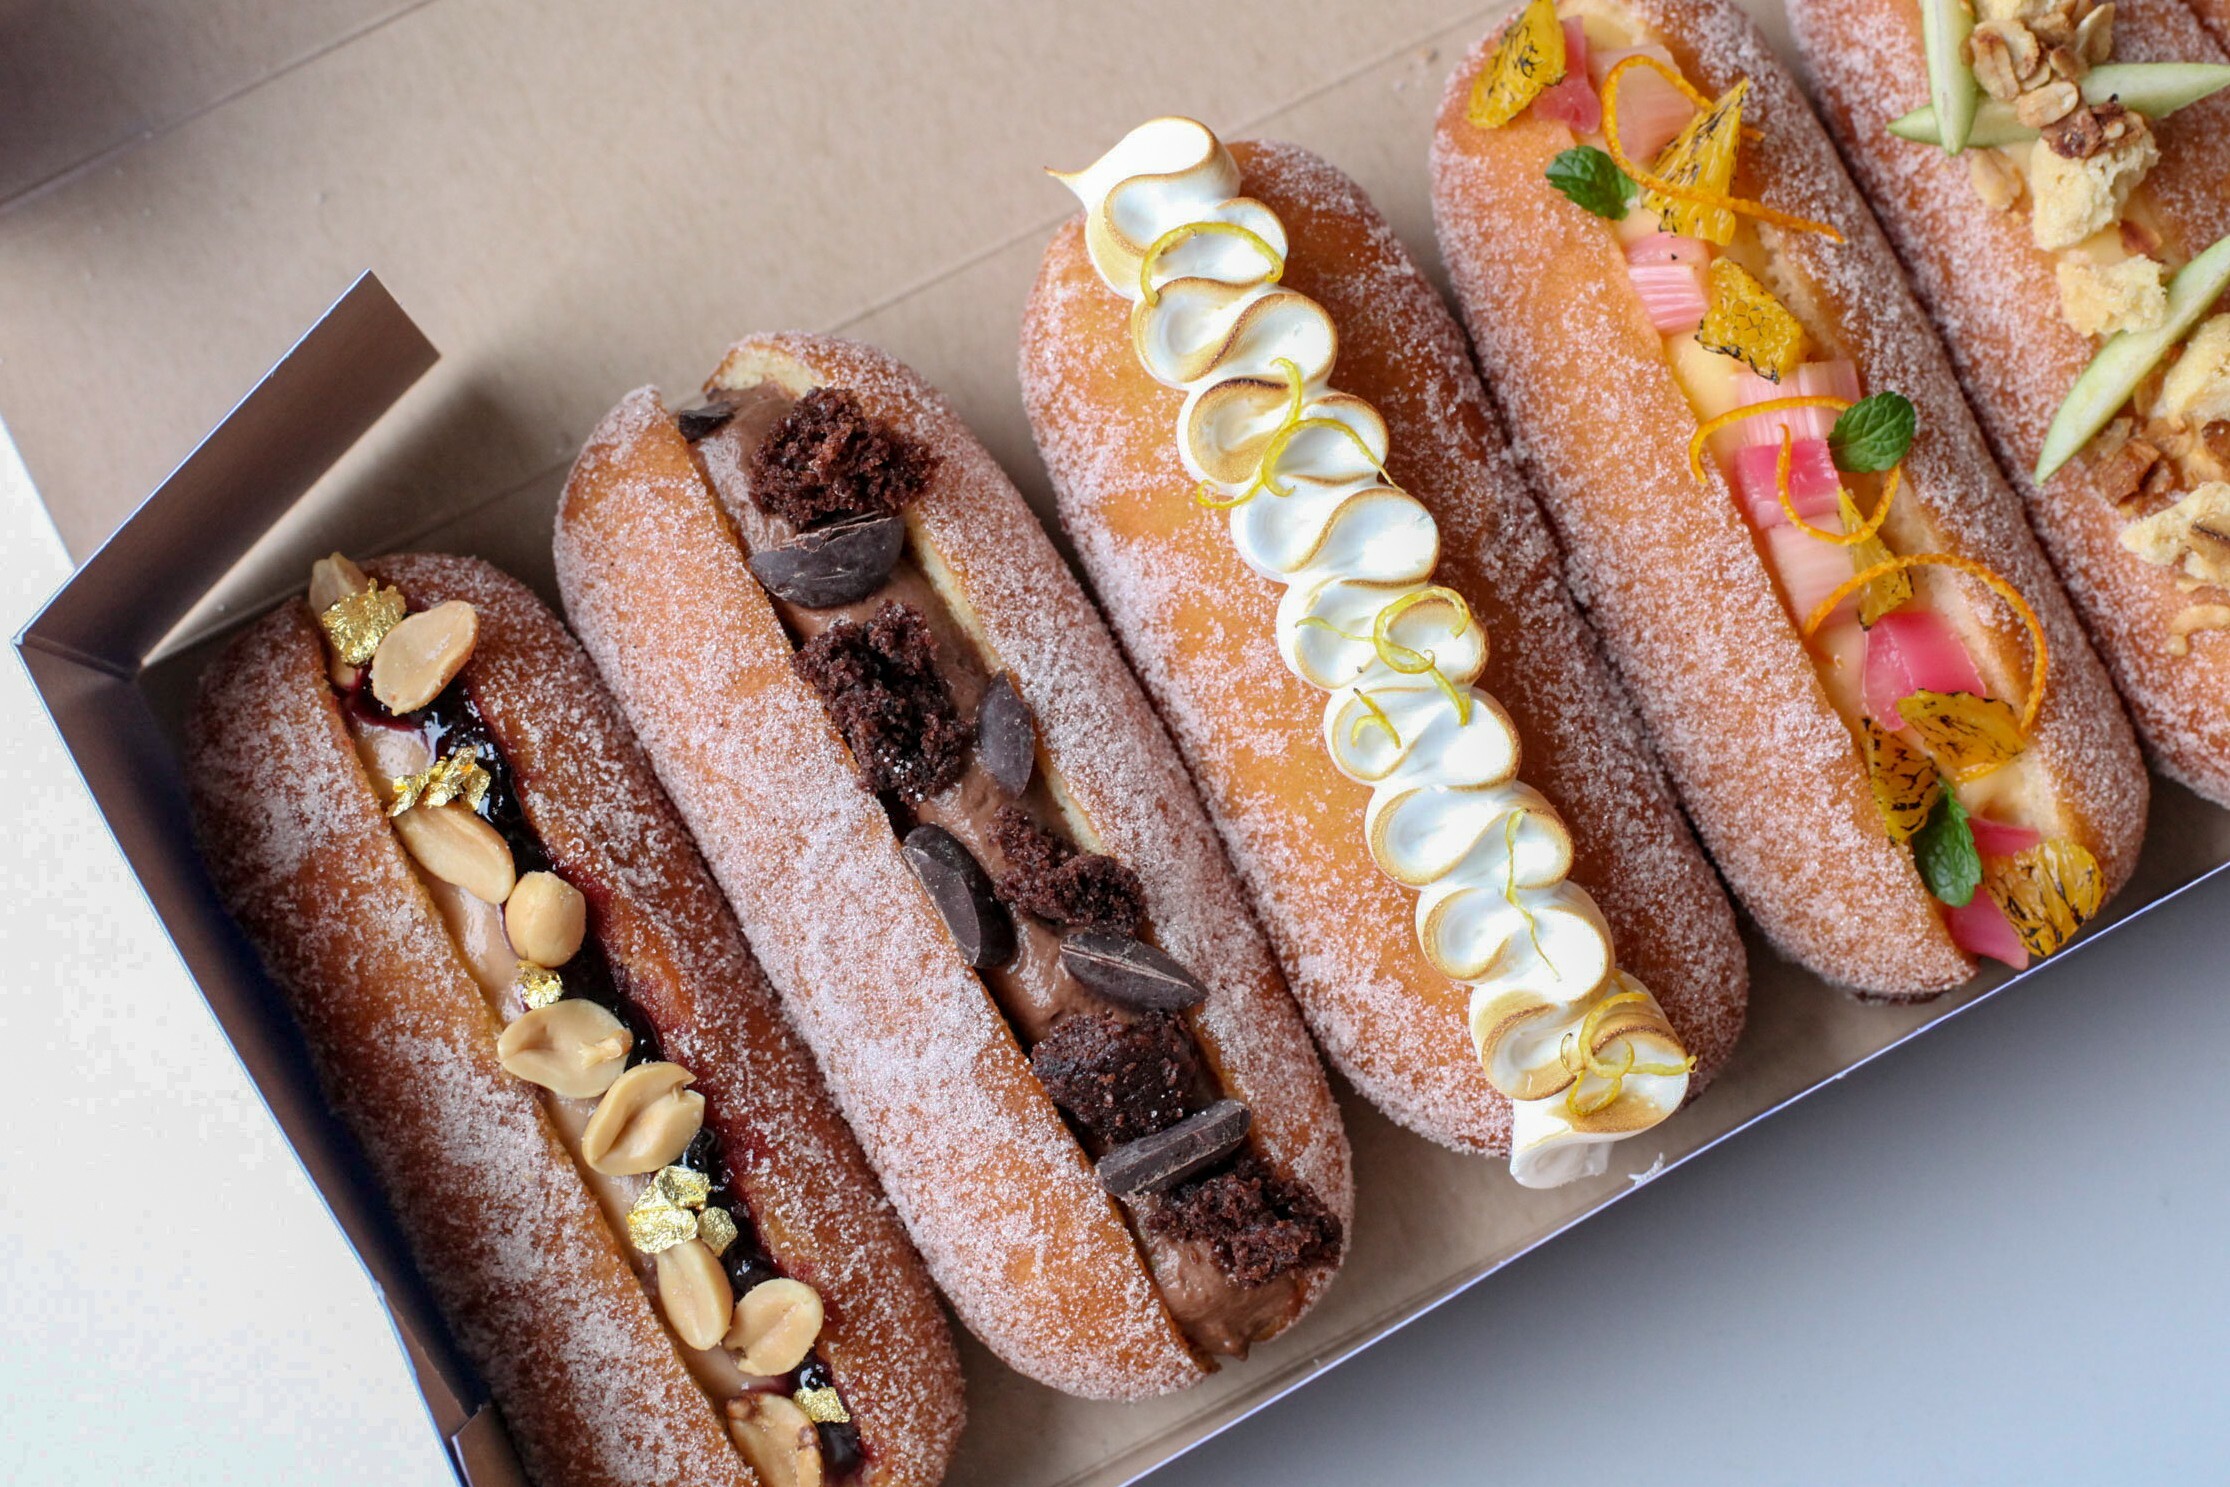 gourmet-doughnut-shop-longboys-is-opening-two-new-london-outlets